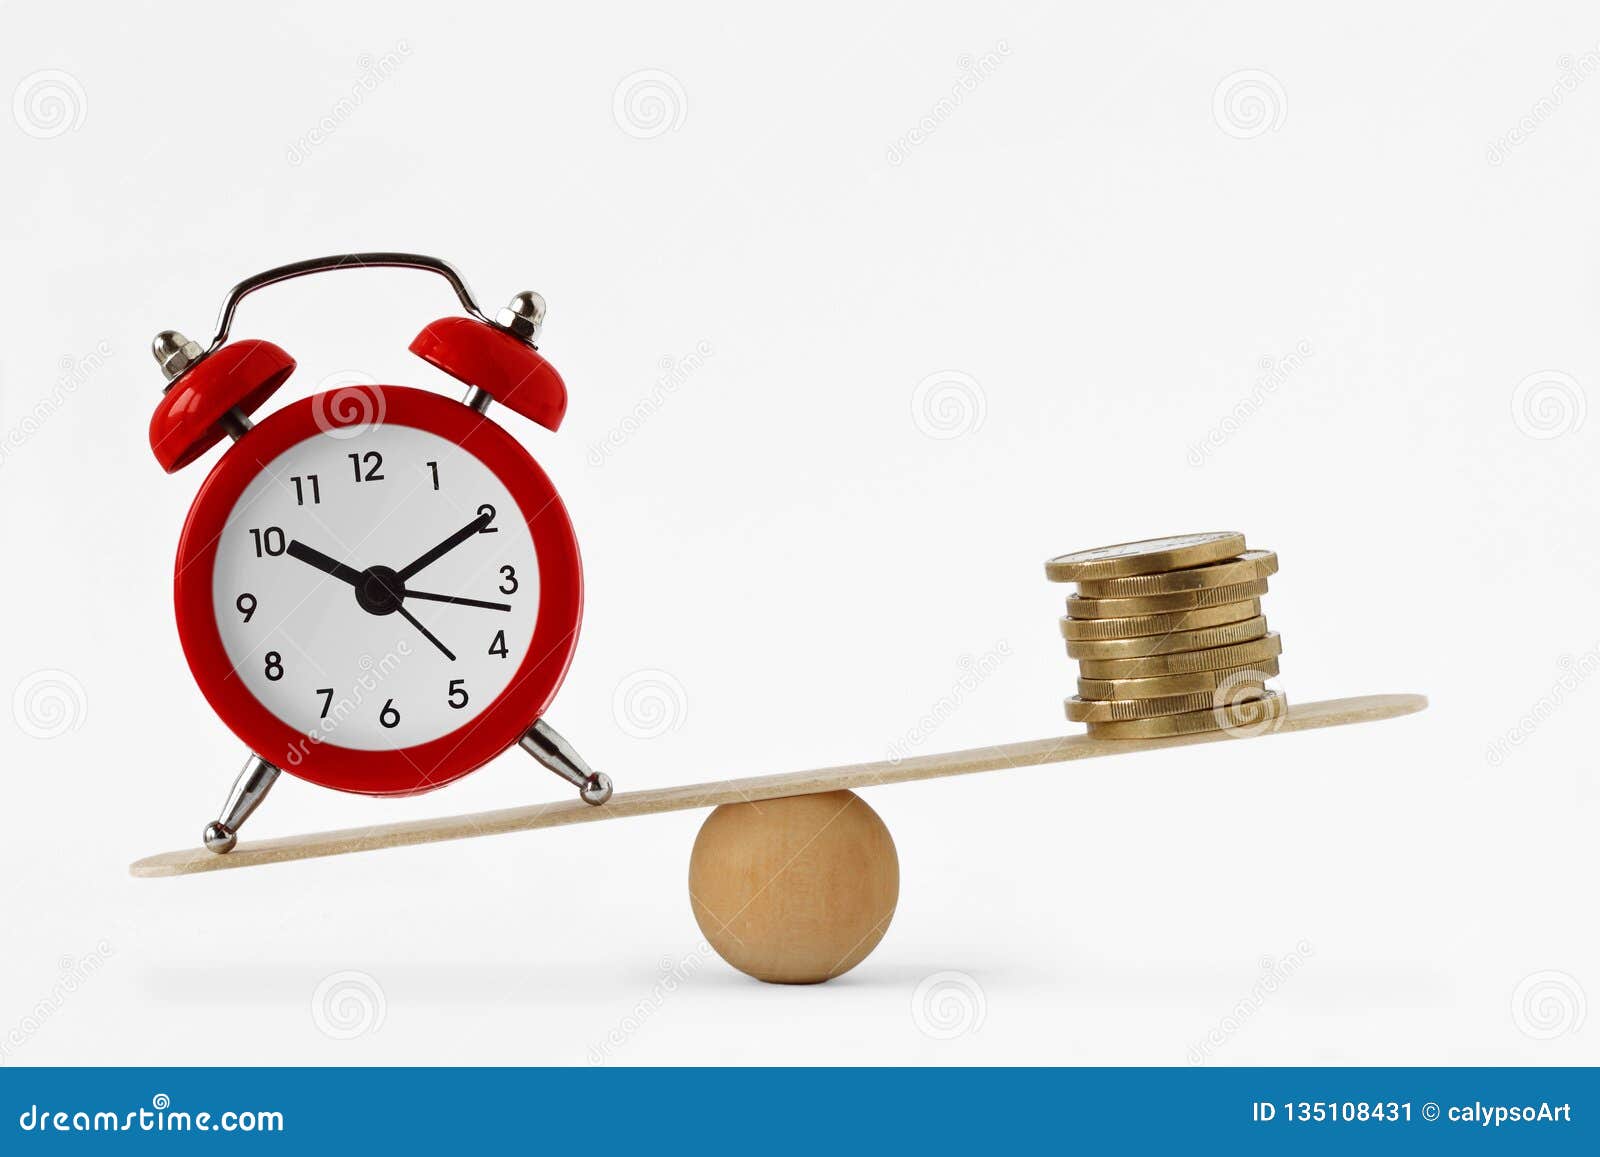 clock and money on scales - importance of time, time and money concept